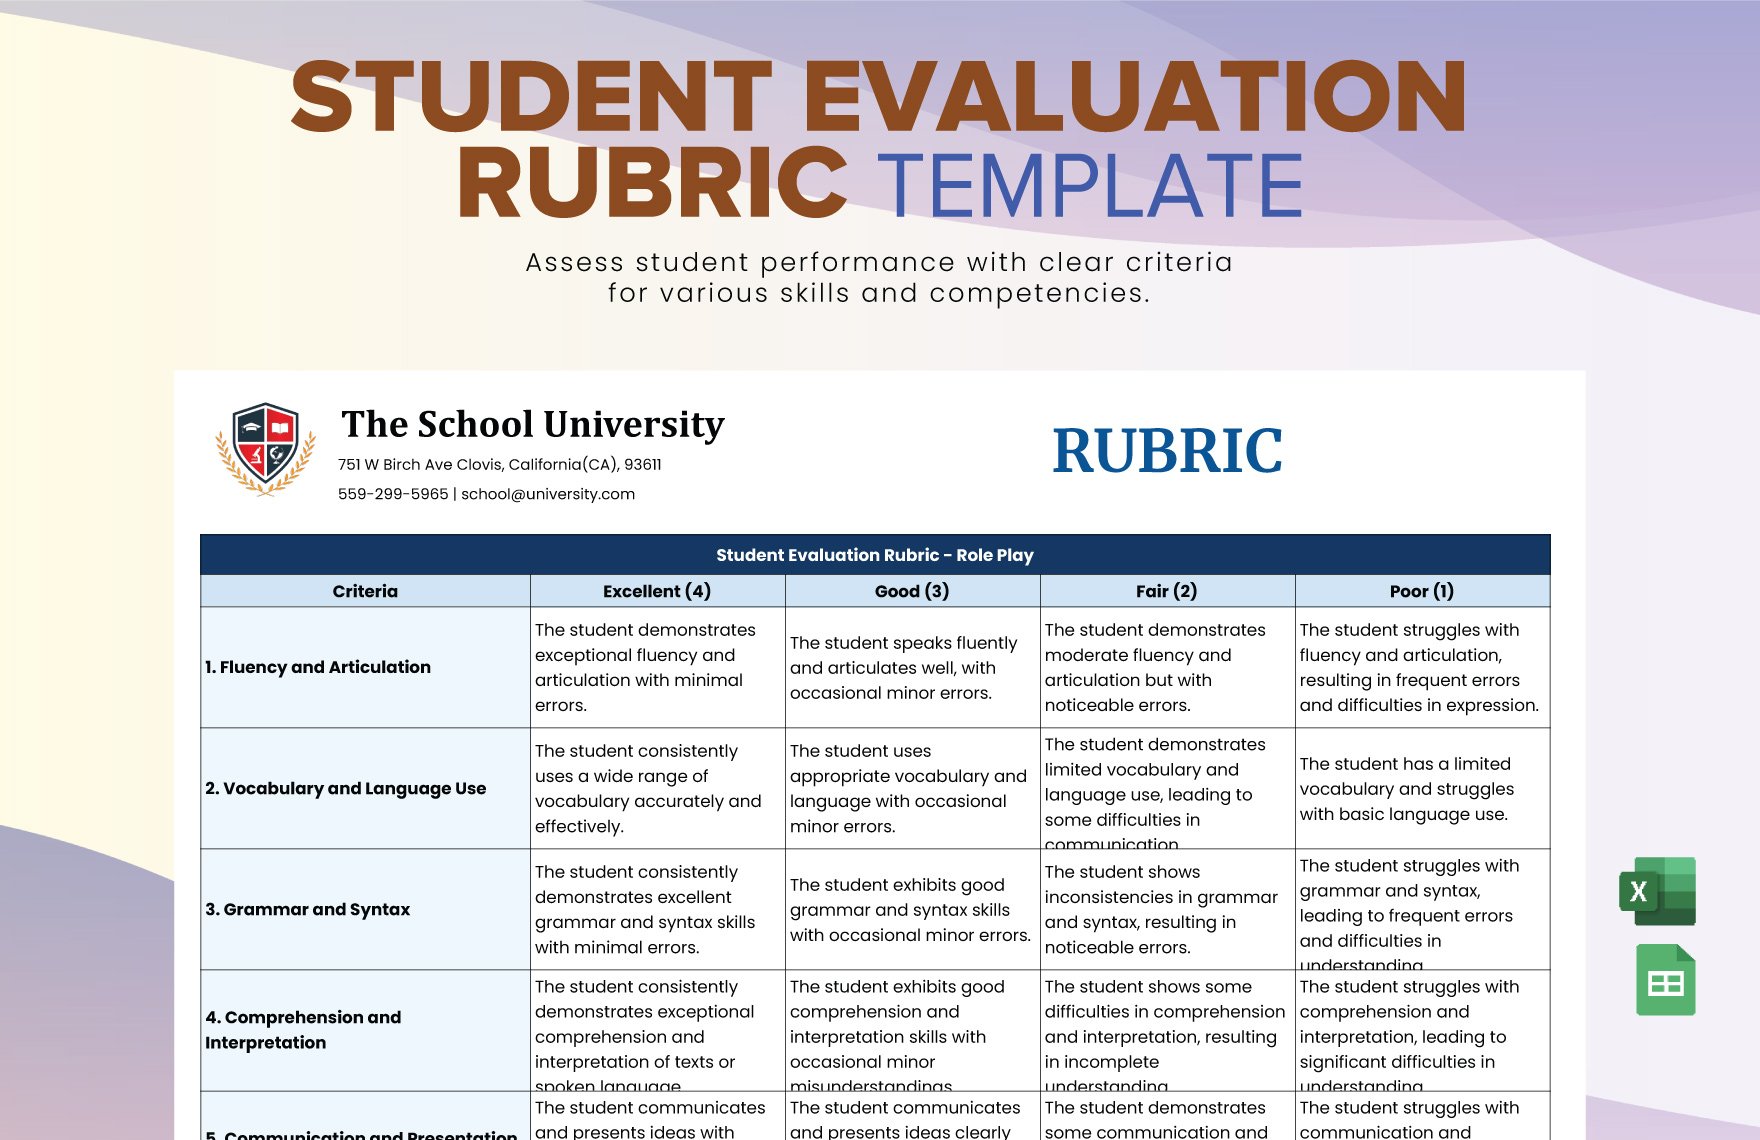 Student Evaluation Rubric Template in Excel, Google Sheets